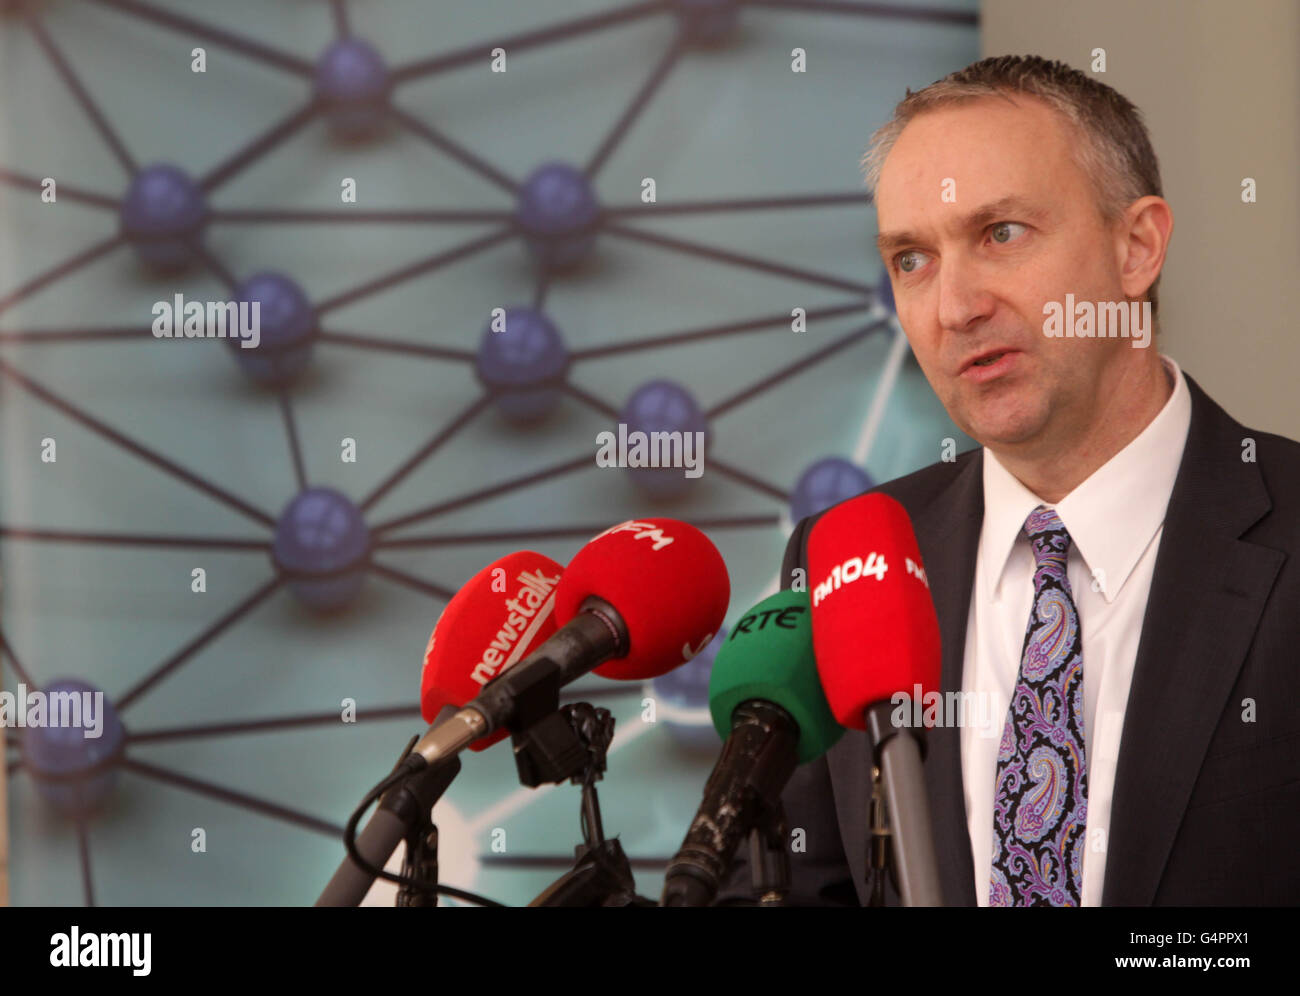 Craig Hayman, General Manager of IBM Industry Solutions, announces the acquisition of Curam Software during a press conference at the Merrion Hotel in Dublin. Stock Photo